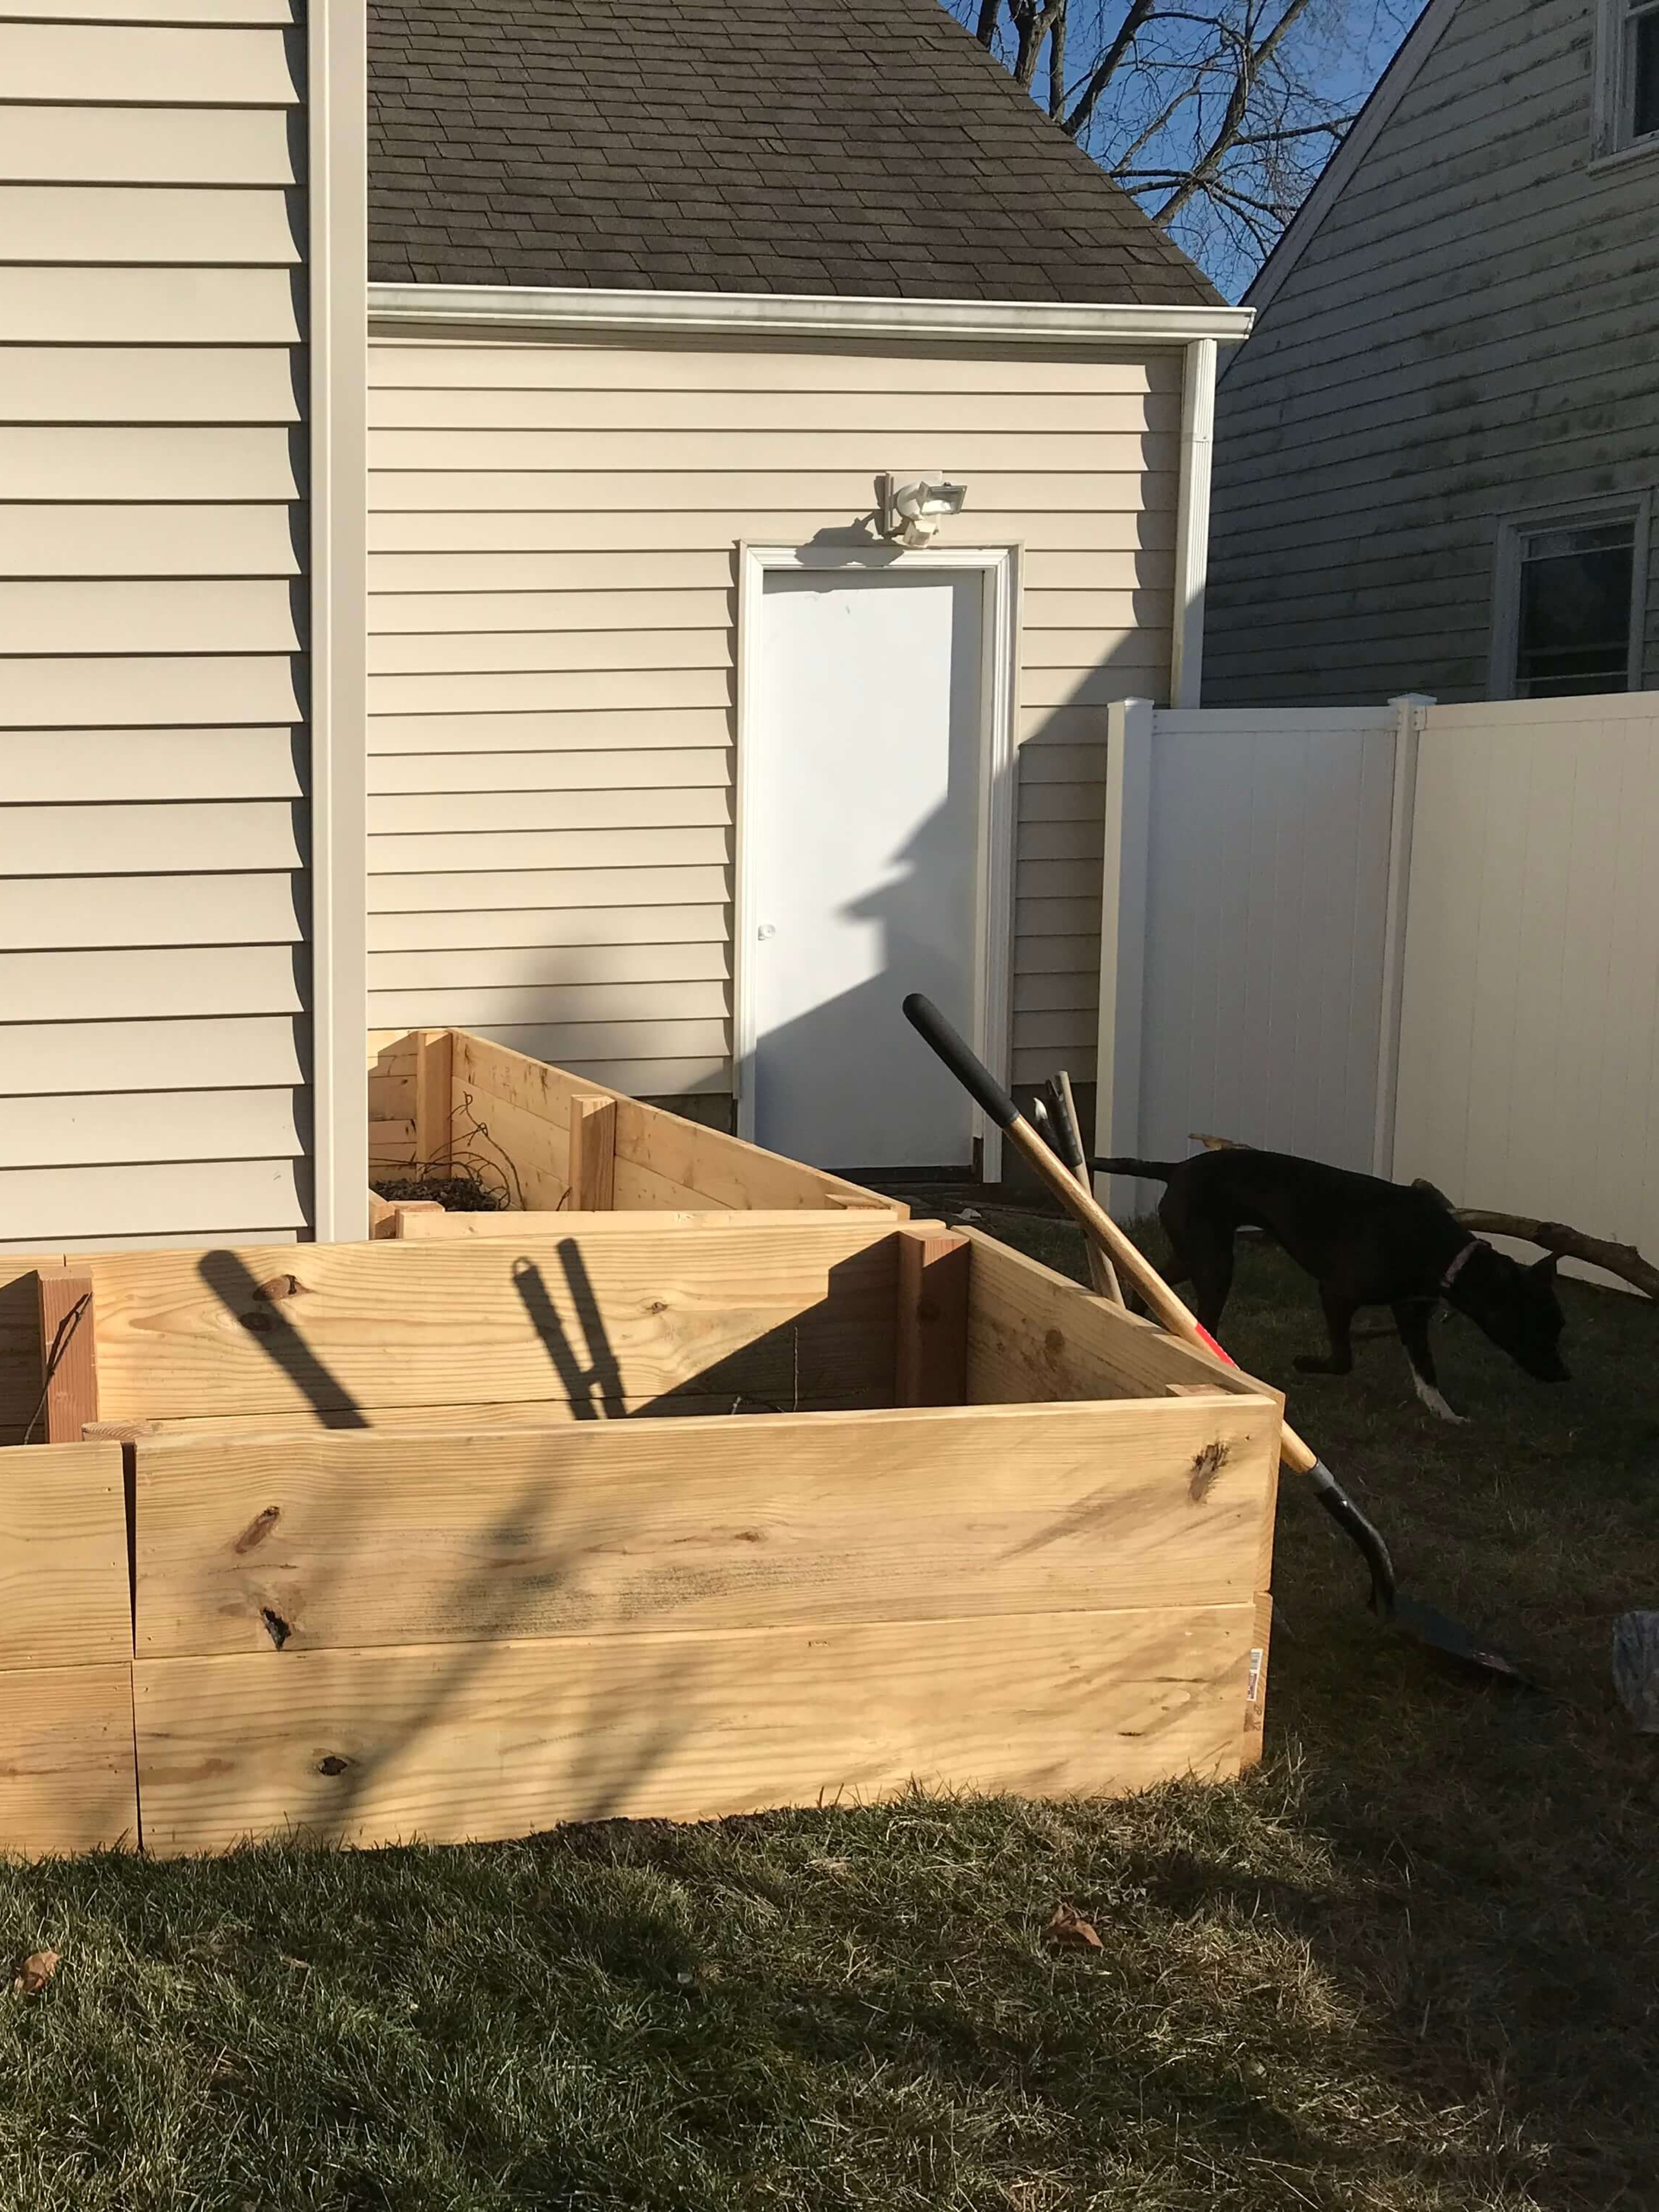 Freshly built wooden raised garden beds making an L along the sides of a house. A shovel leans against the beds, and a black dog is in shadow in the background.